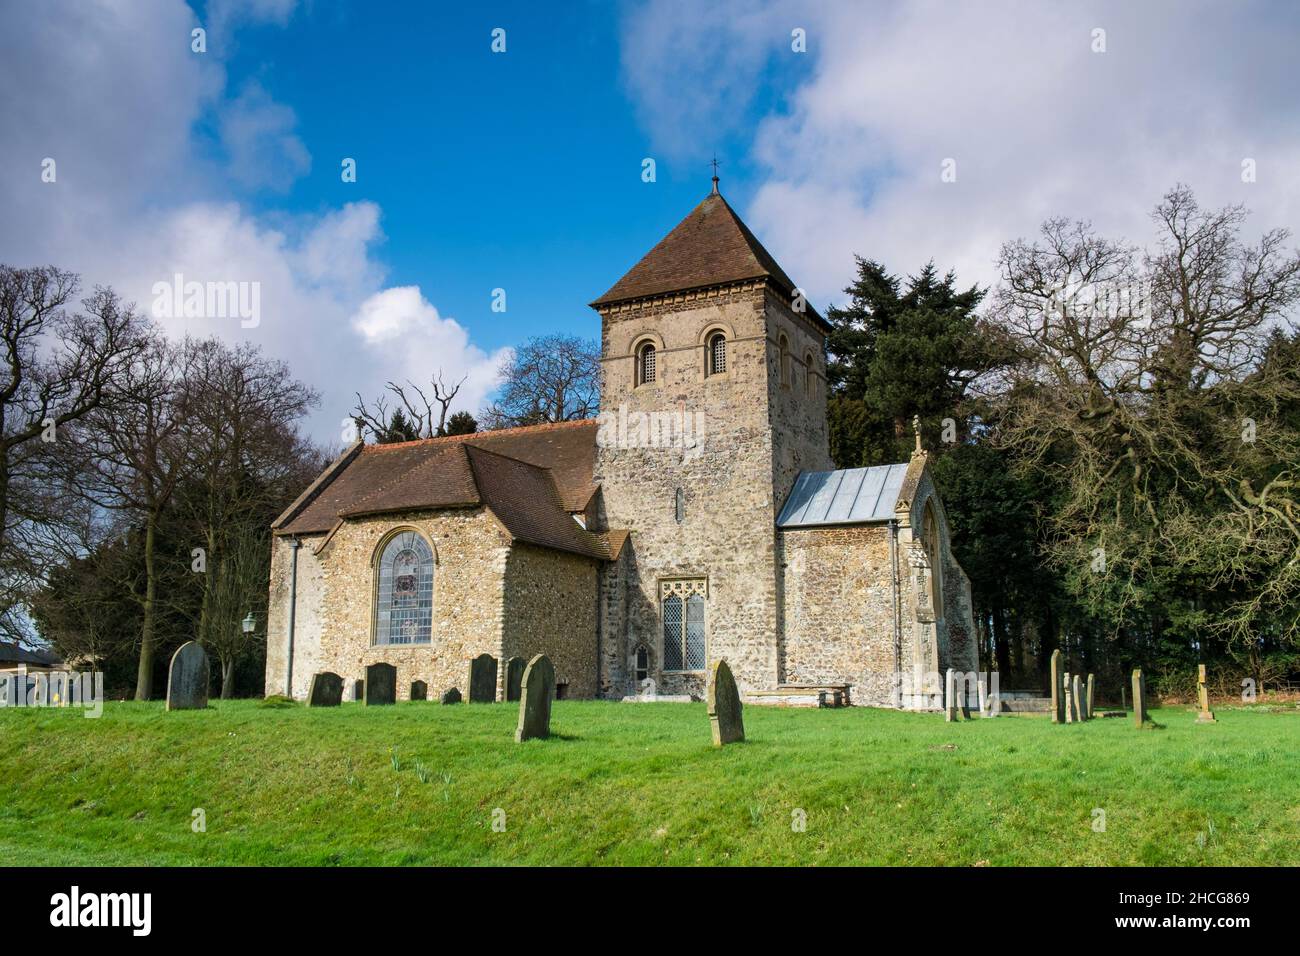 The Church of St Peter, Melton Constable, Norfolk, England Stock Photo